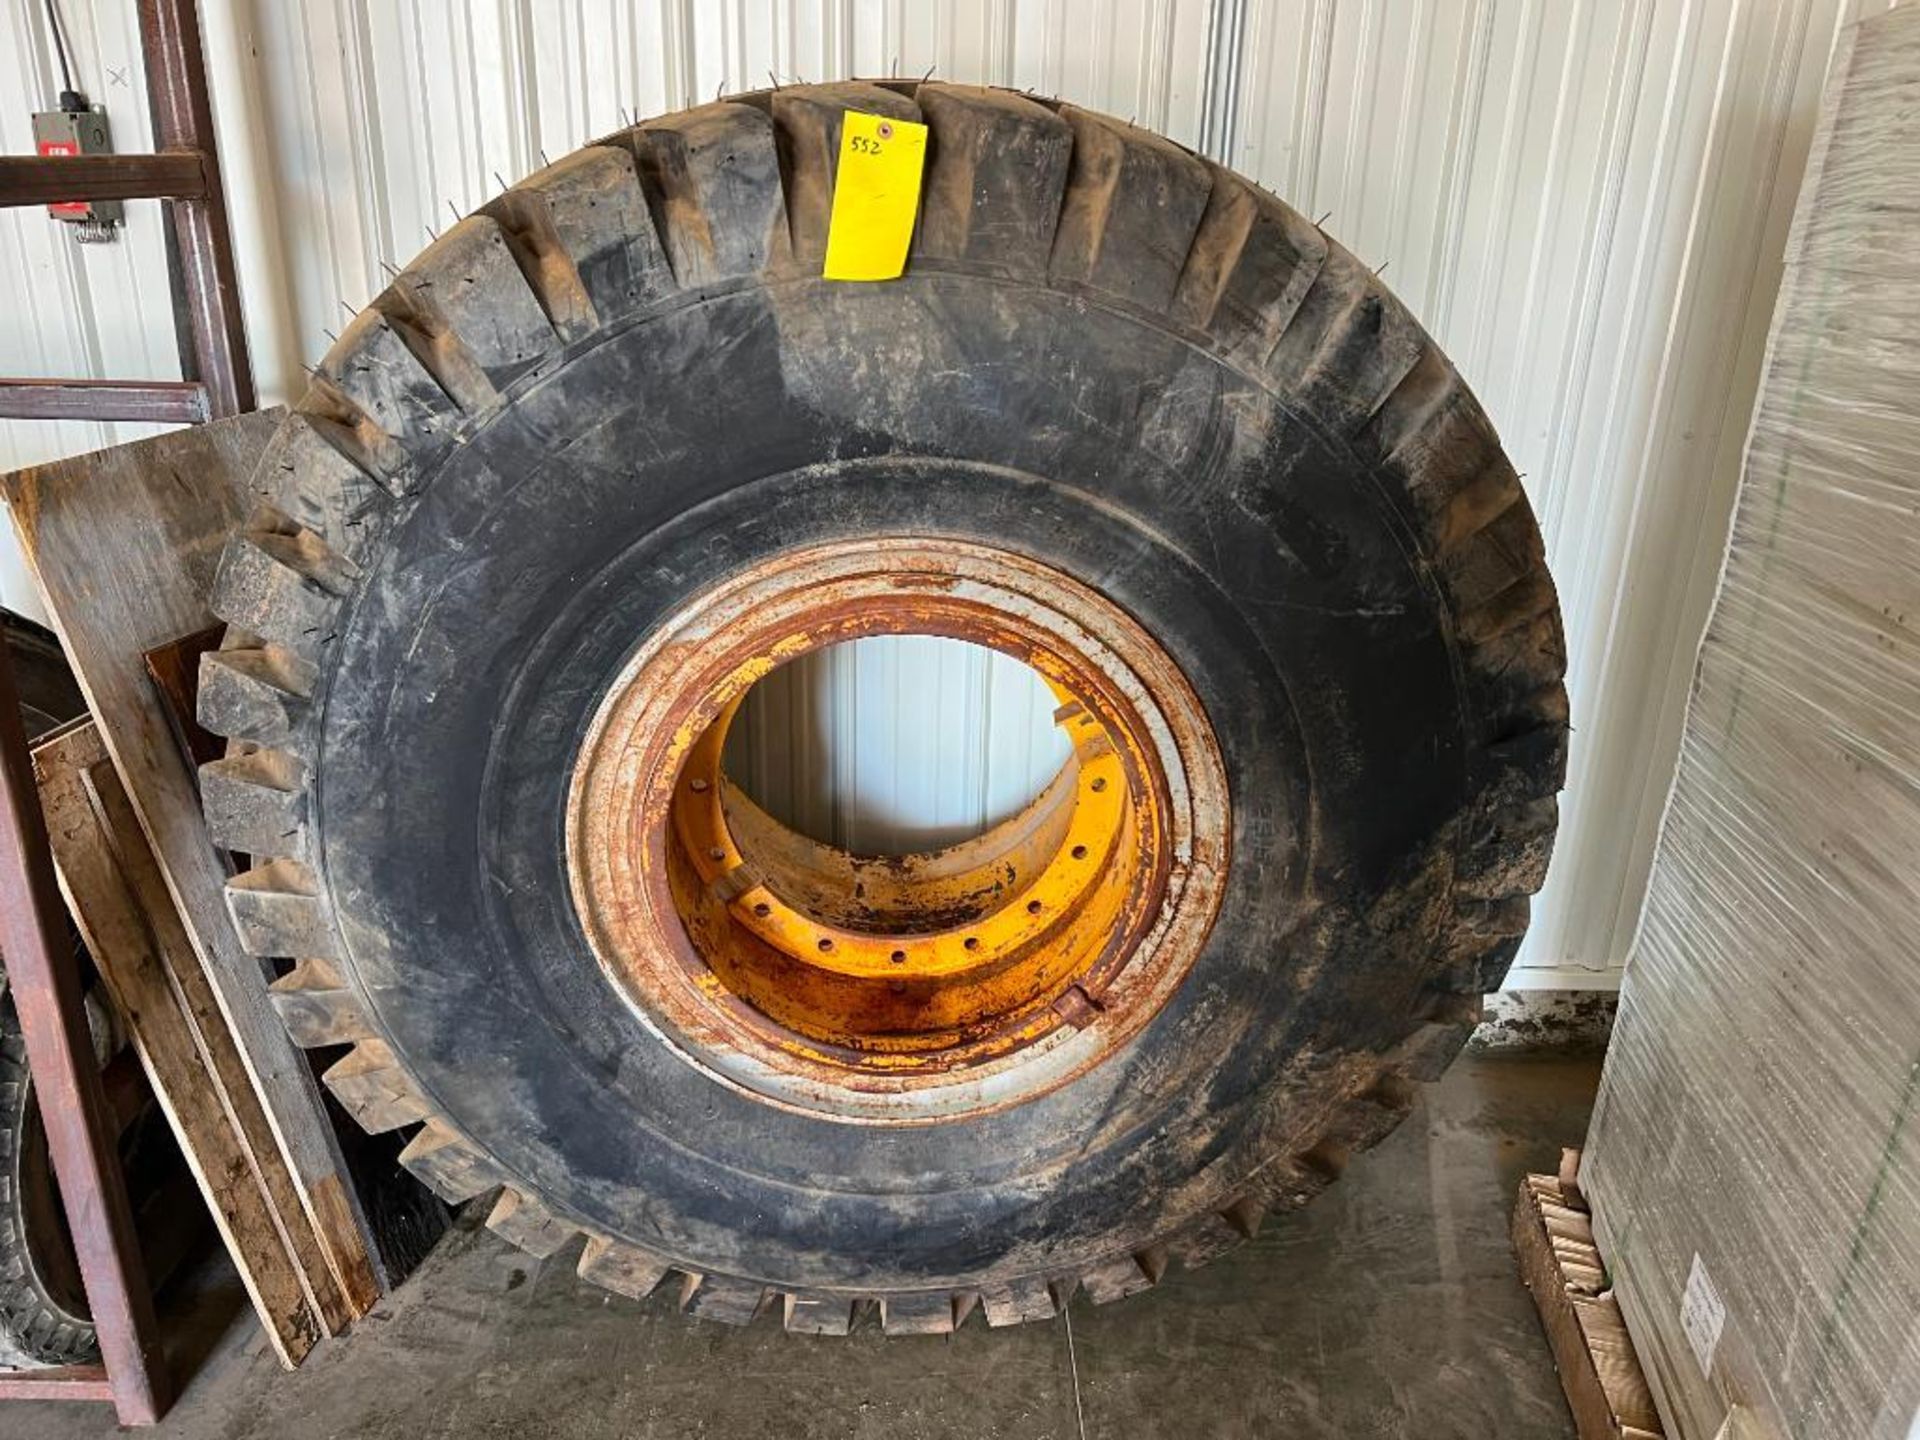 New 23.5 - 25 Tubeless Tire & Rim For 966 Cat Loader. Located in Altamont, IL